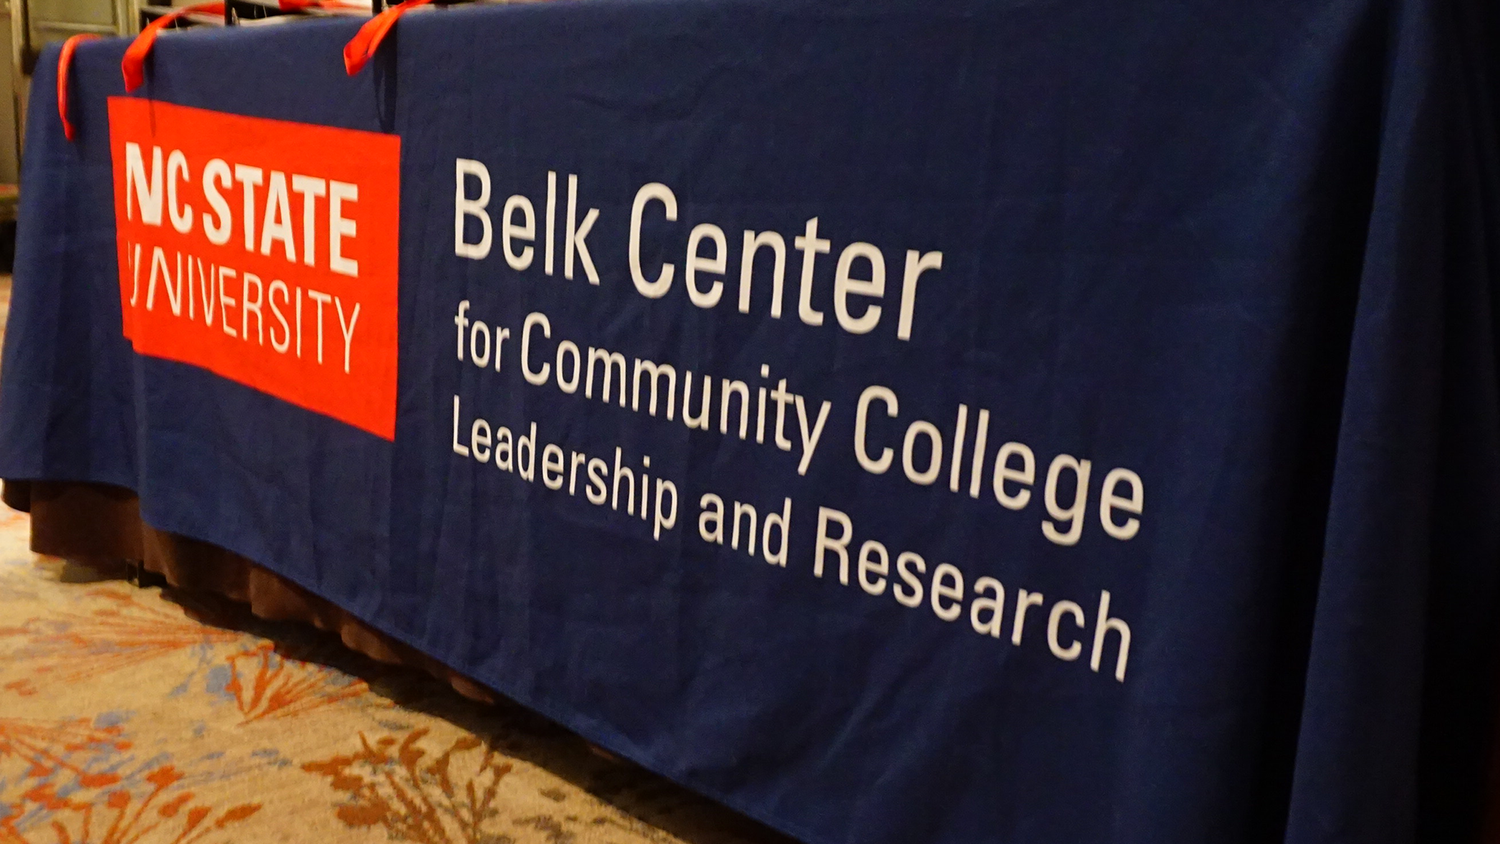 Belk Center for Community College Leadership and Research wordmark